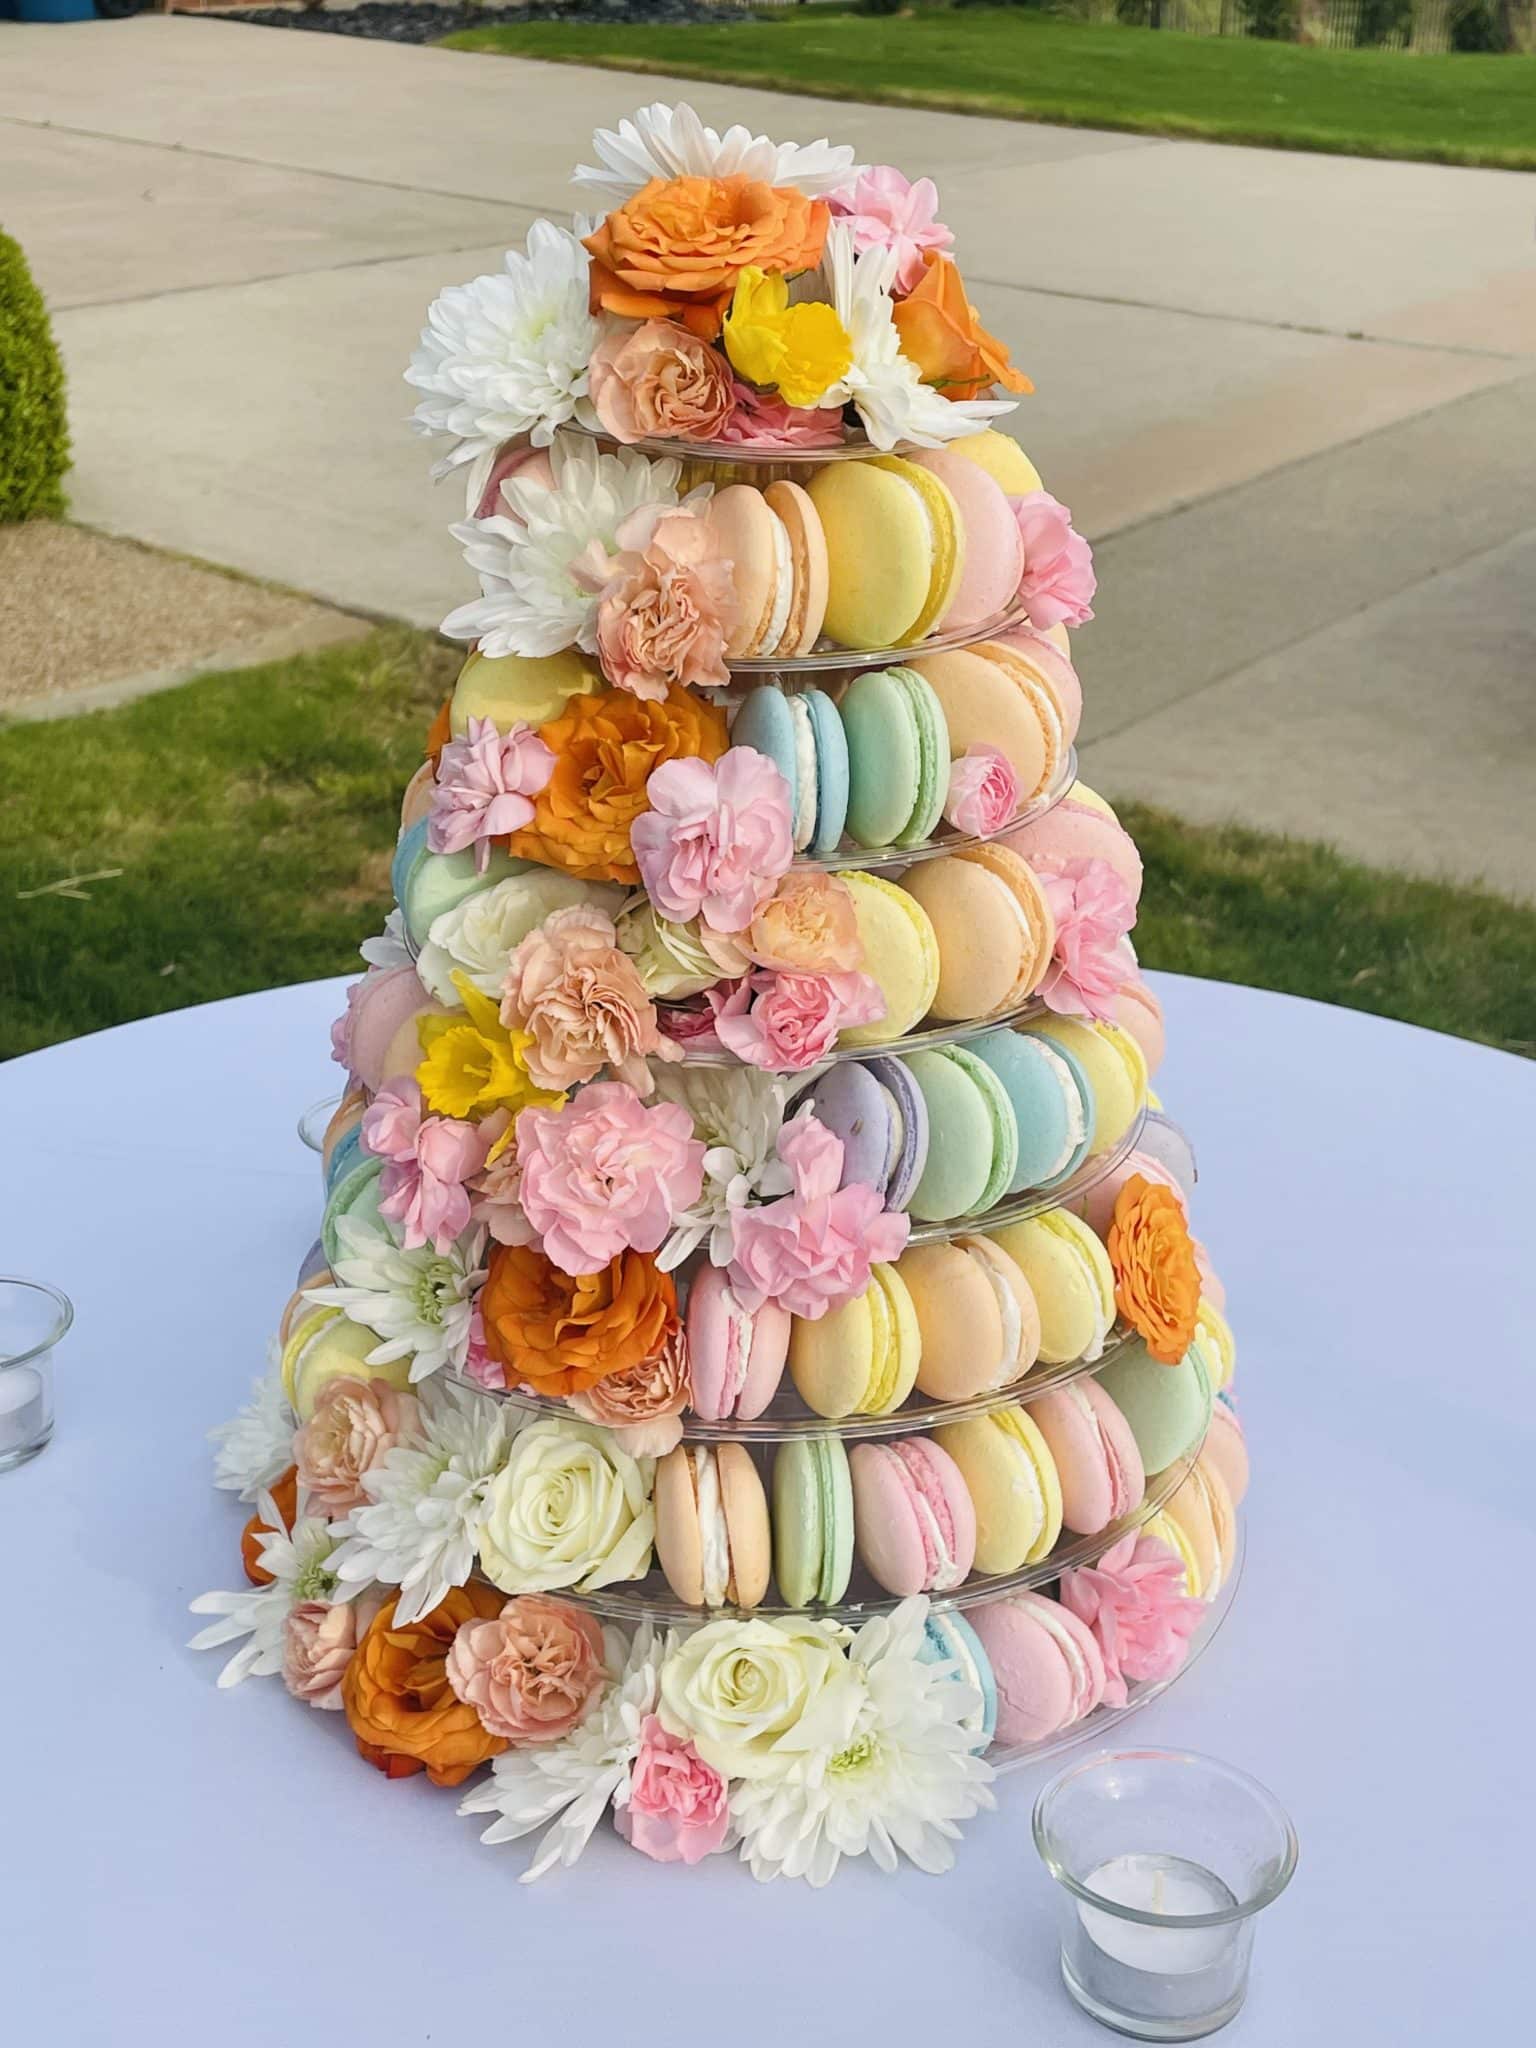 Colorful tower of macarons with fresh flowers | Petite Sweets by Laura